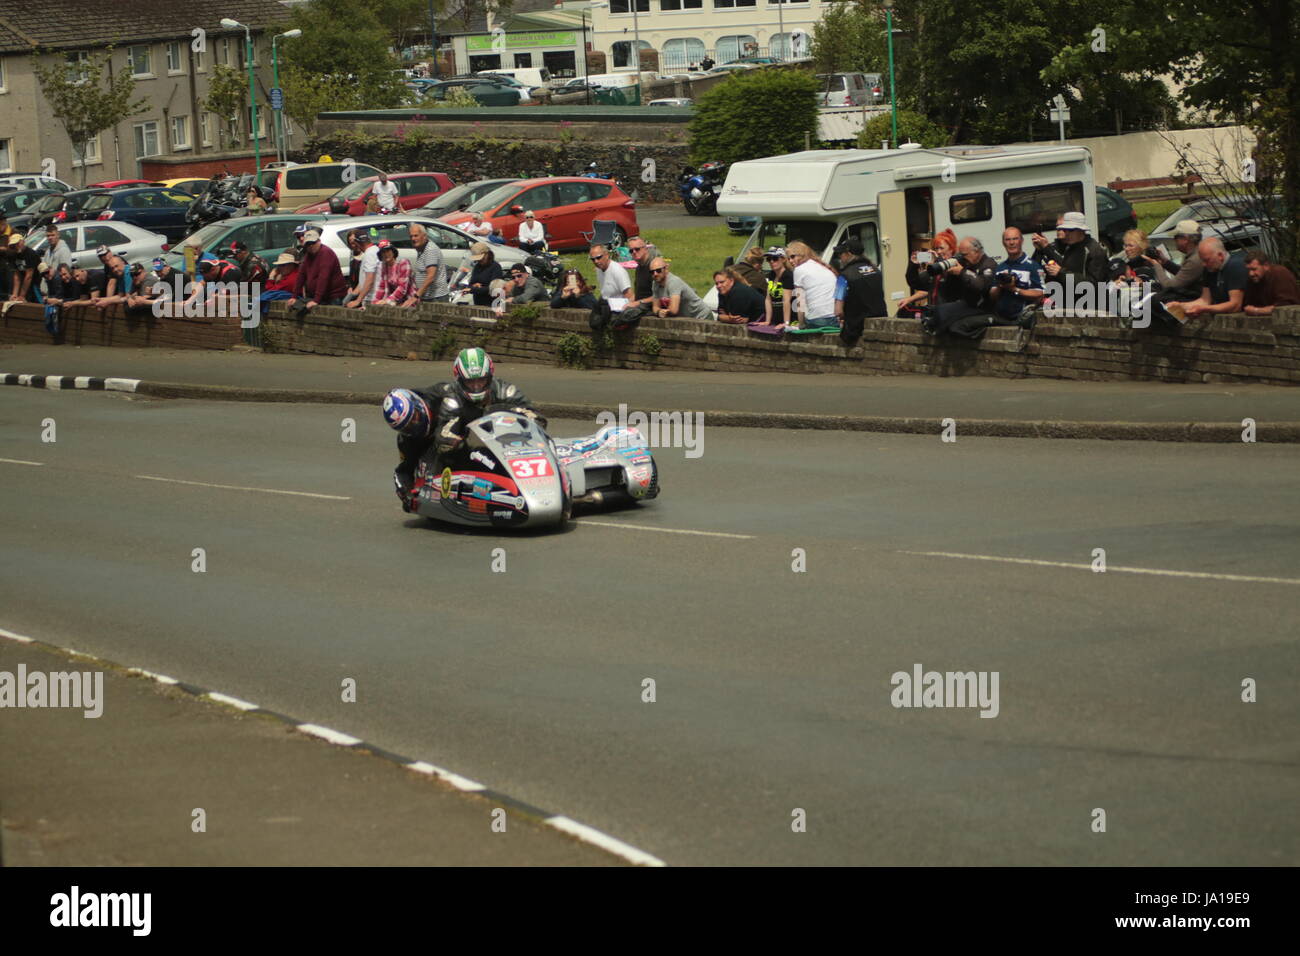 Isle of Man TT Races, Sidecar Qualifying Practice Race, Saturday 3 June 2017. Sidecar qualifying session. Number 37, Claude Montagnier and Olivier Chabloz on a 600cc LCR Kawasaki of the OFTIMARK team from Roissy en Brie, France.Credit: Eclectic Art and Photography/Alamy Live News. Stock Photo